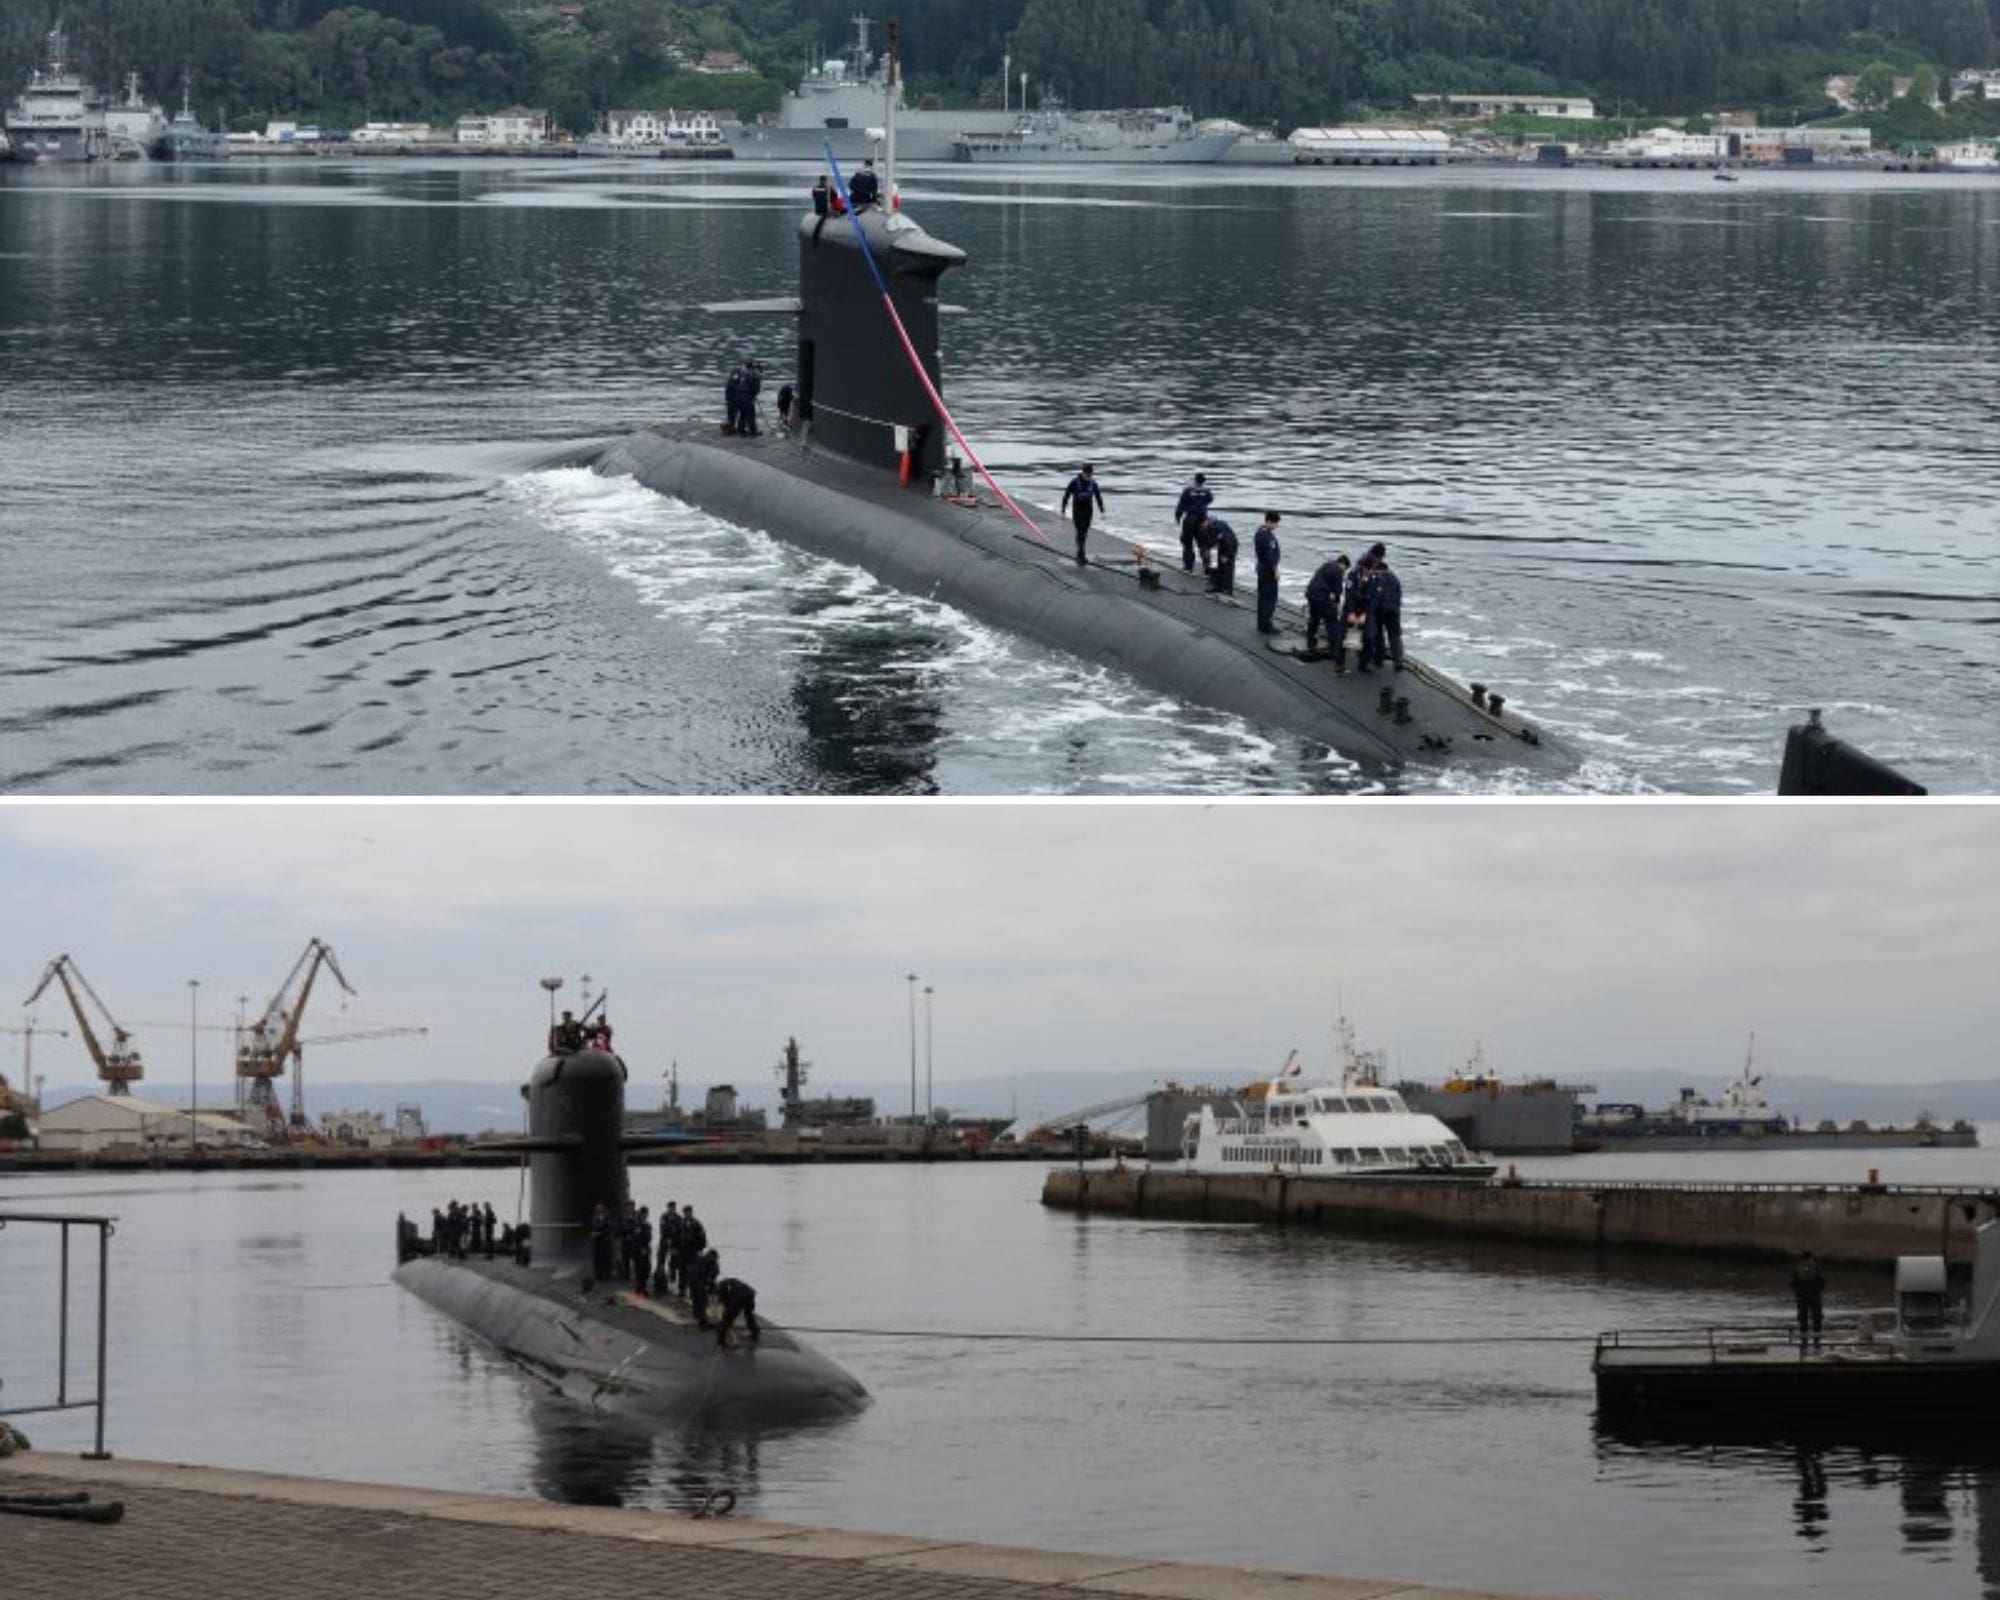 The submarine Carrera returned to Chile after participating in the DESI exercise in the United States.